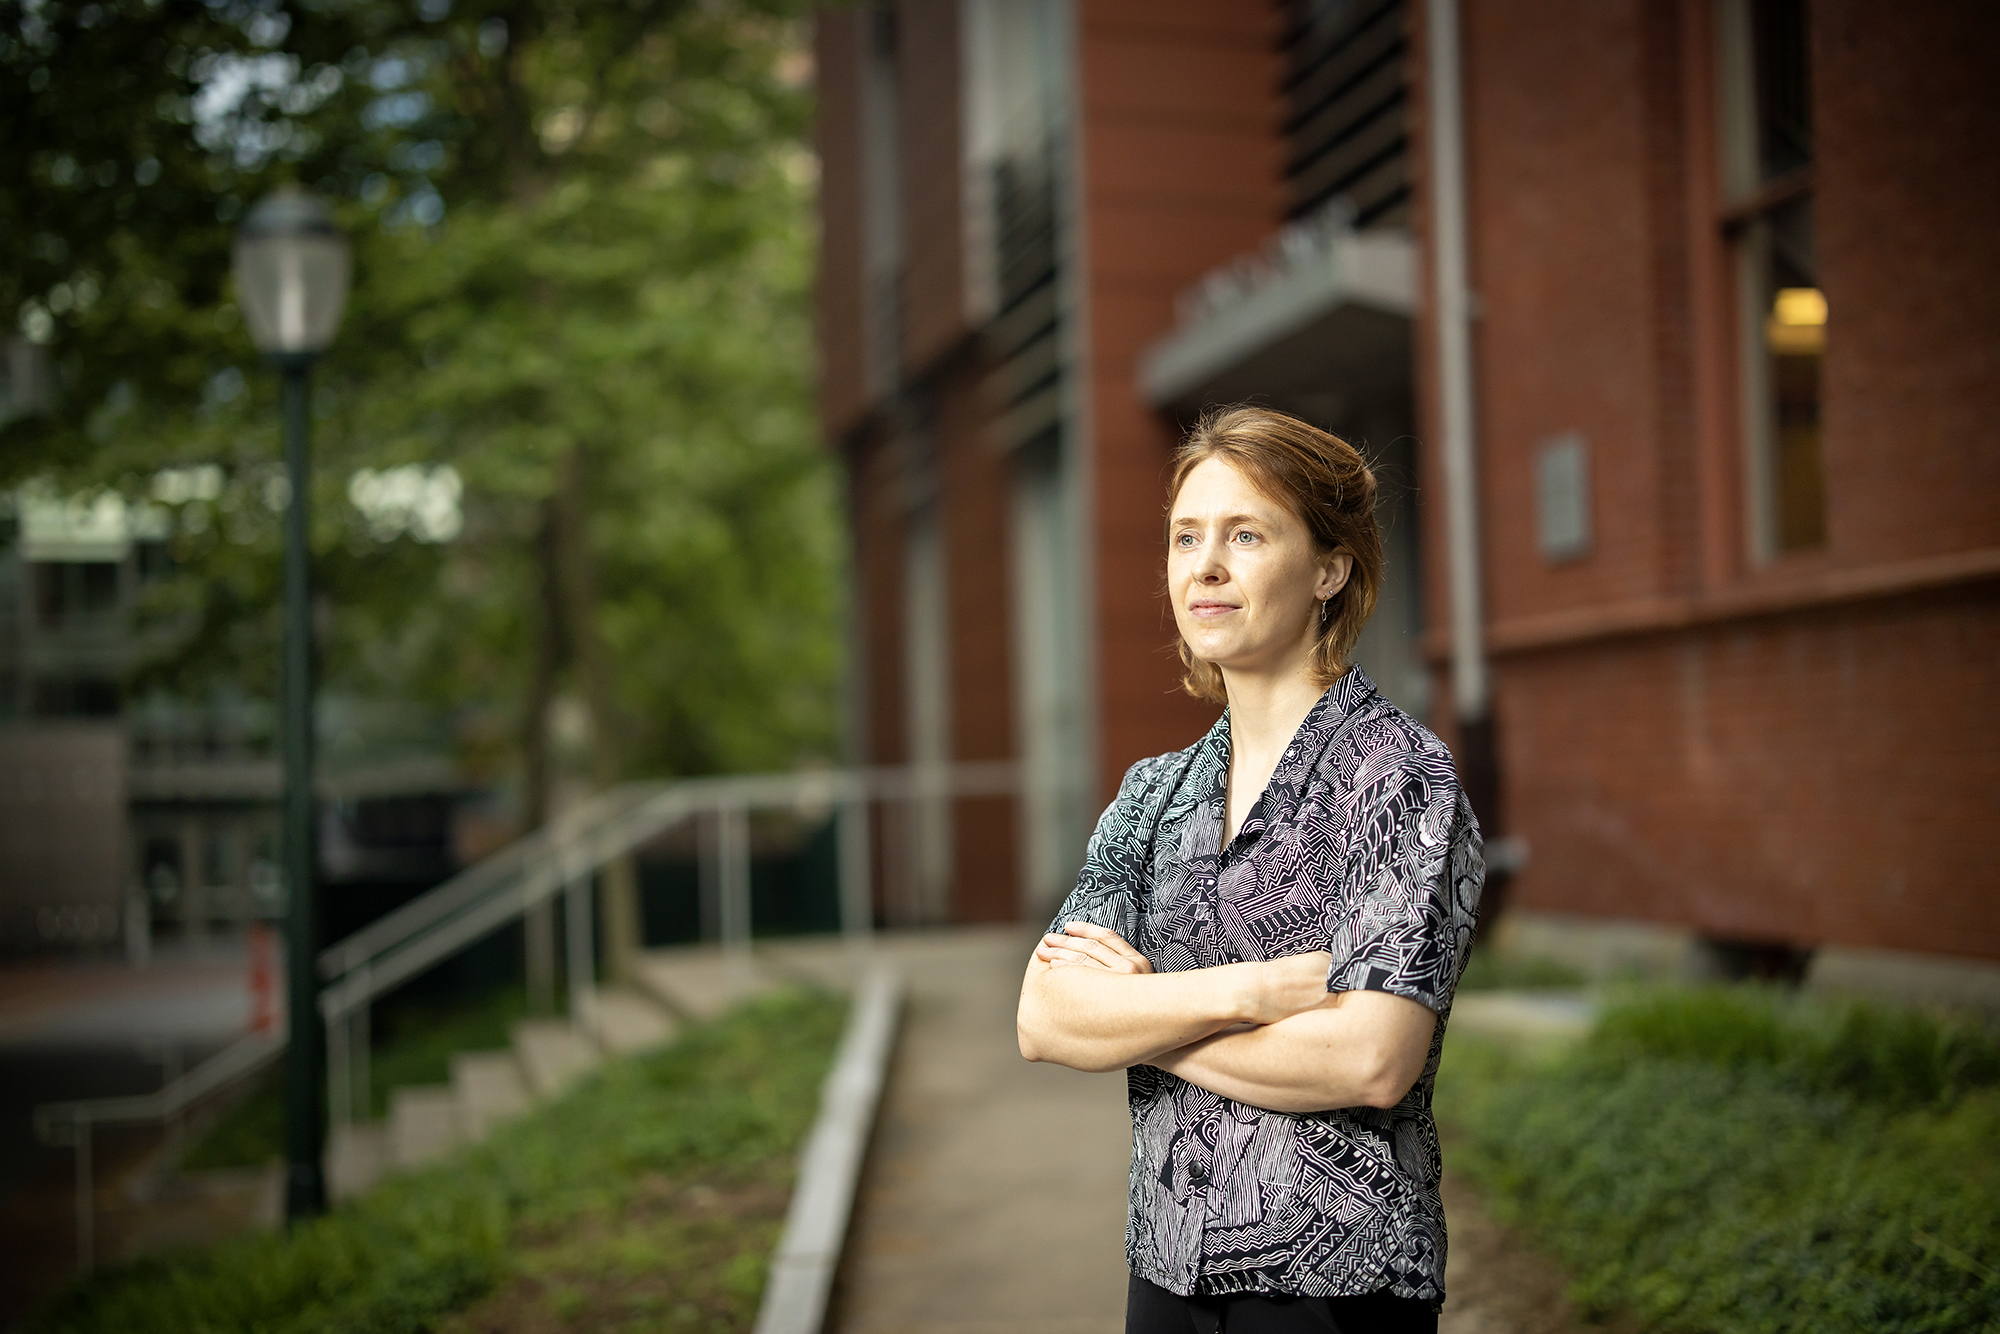 Katherine Scahill poses with her arms crossed in front of the Lerner Centeron Penn's campus.